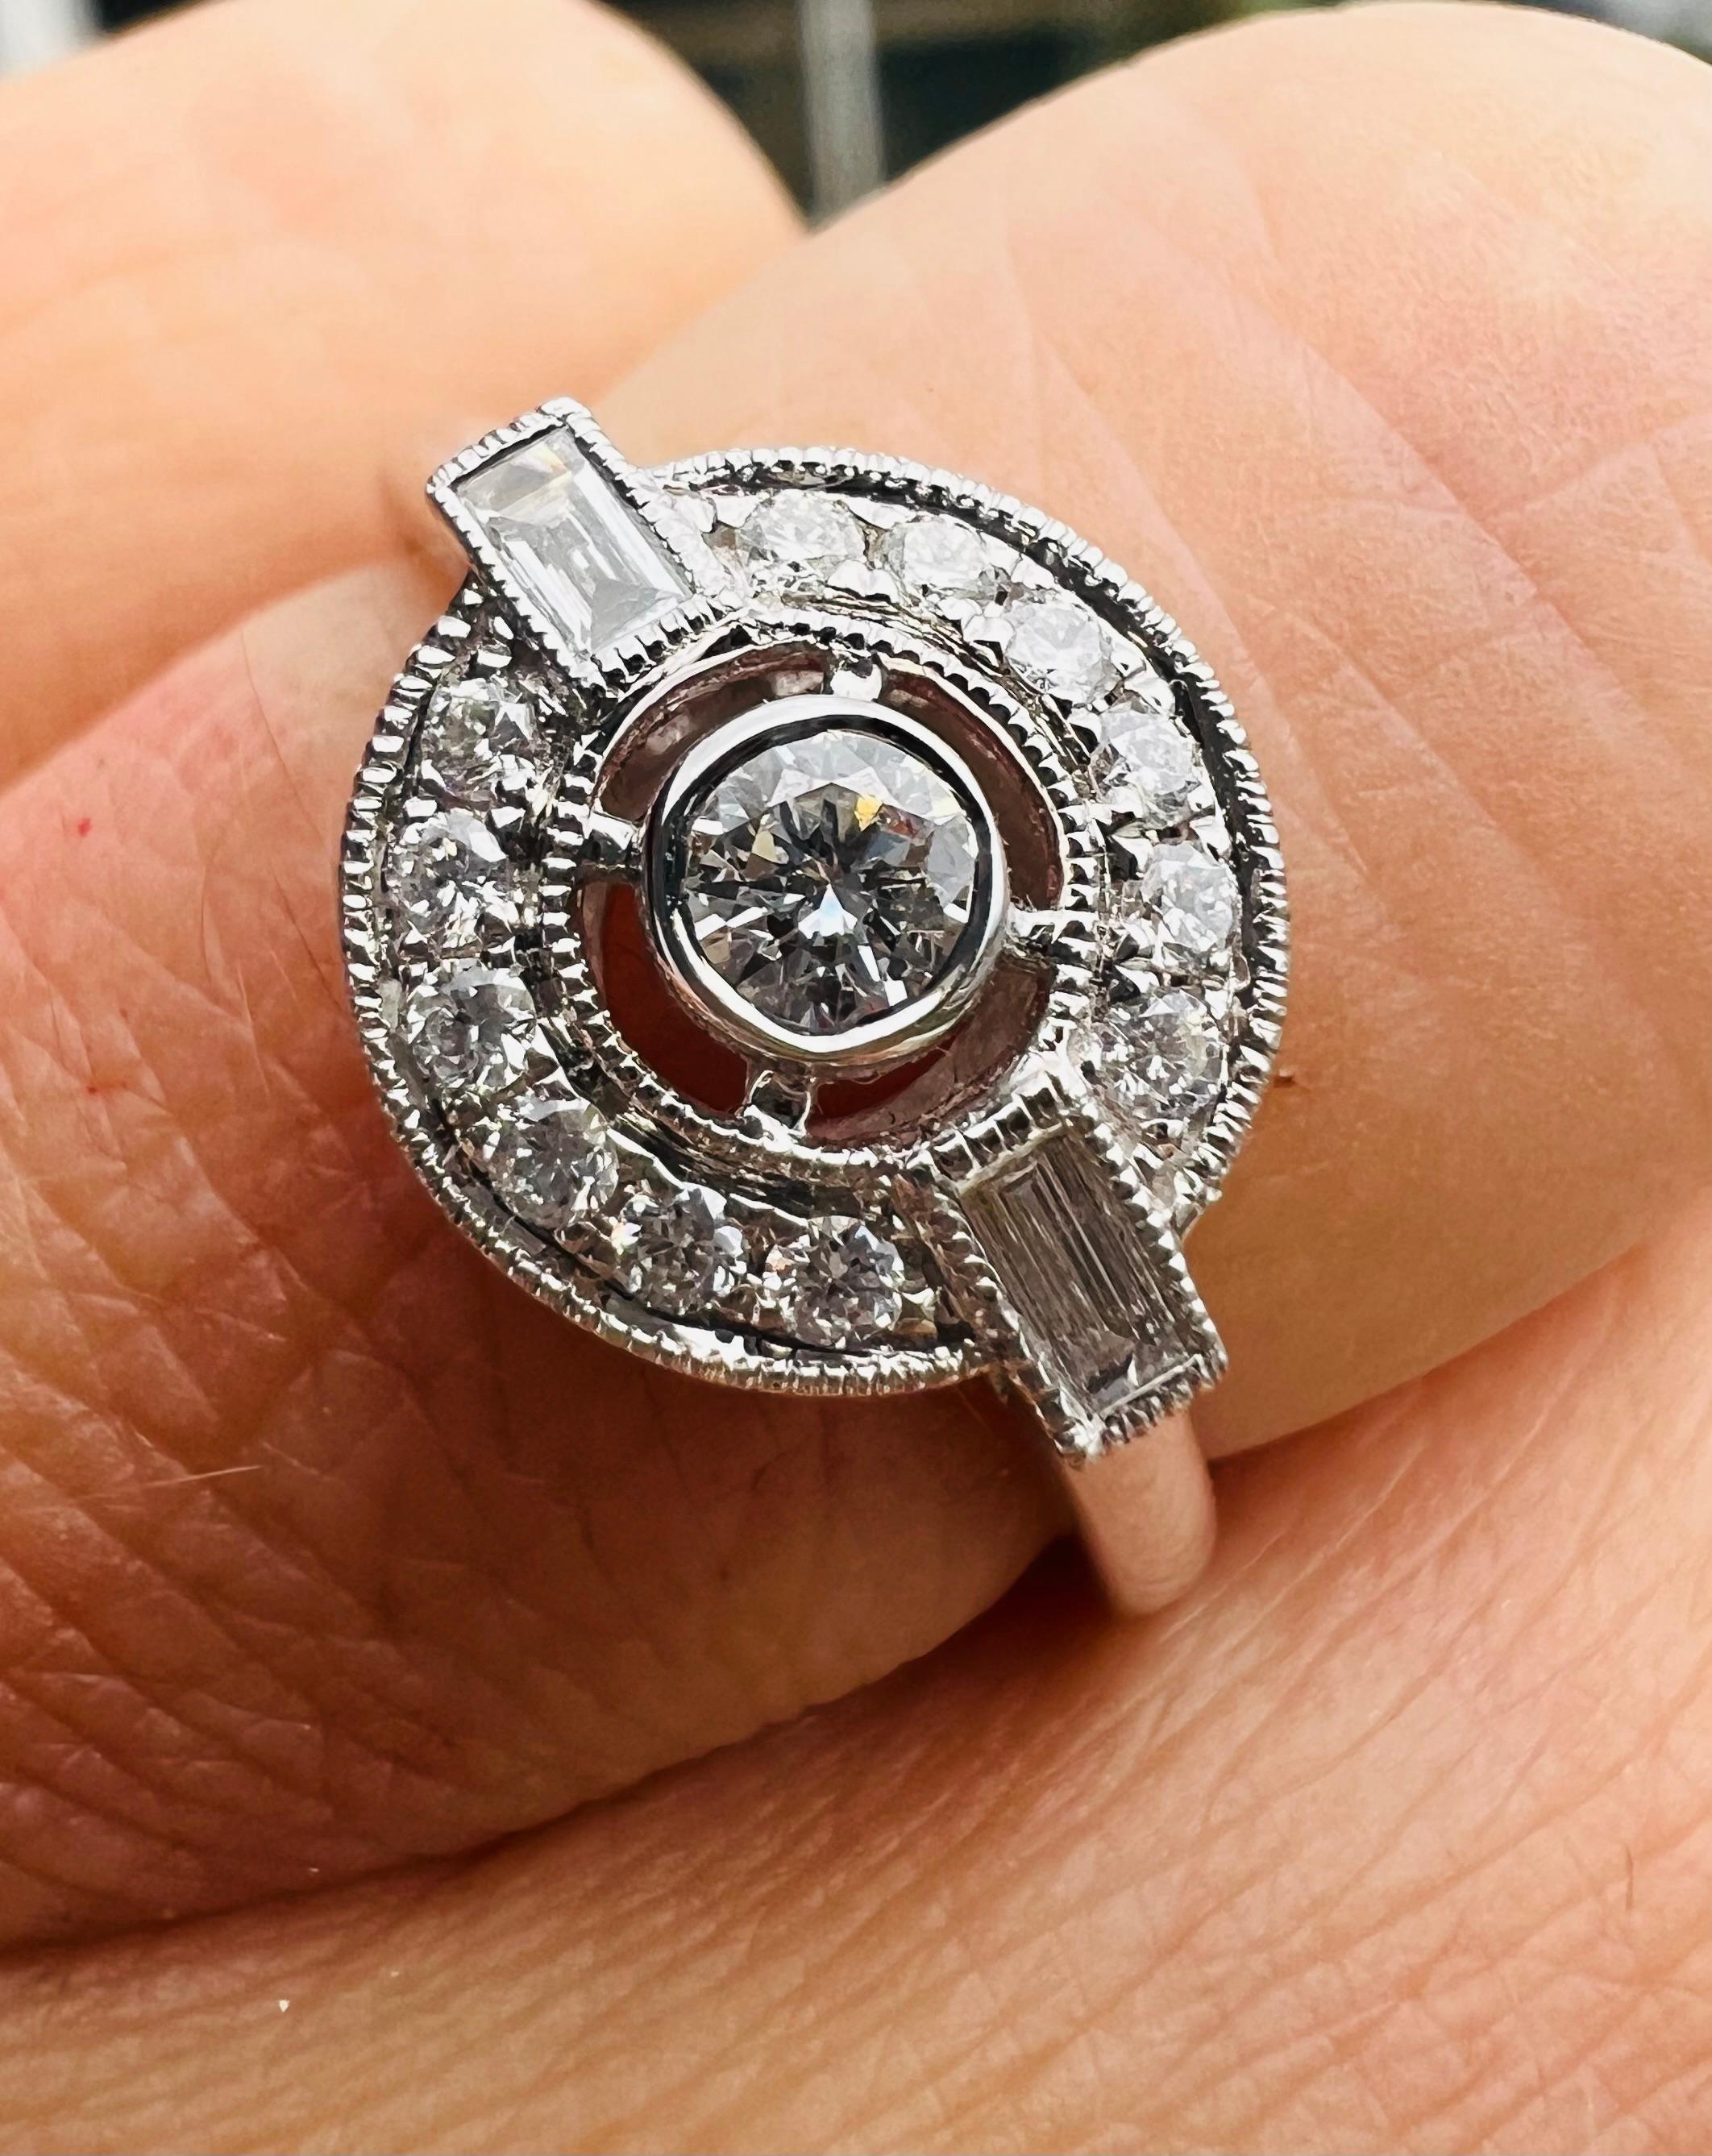 18-Carat White Gold Ring Set With A Paving Of Diamonds 5